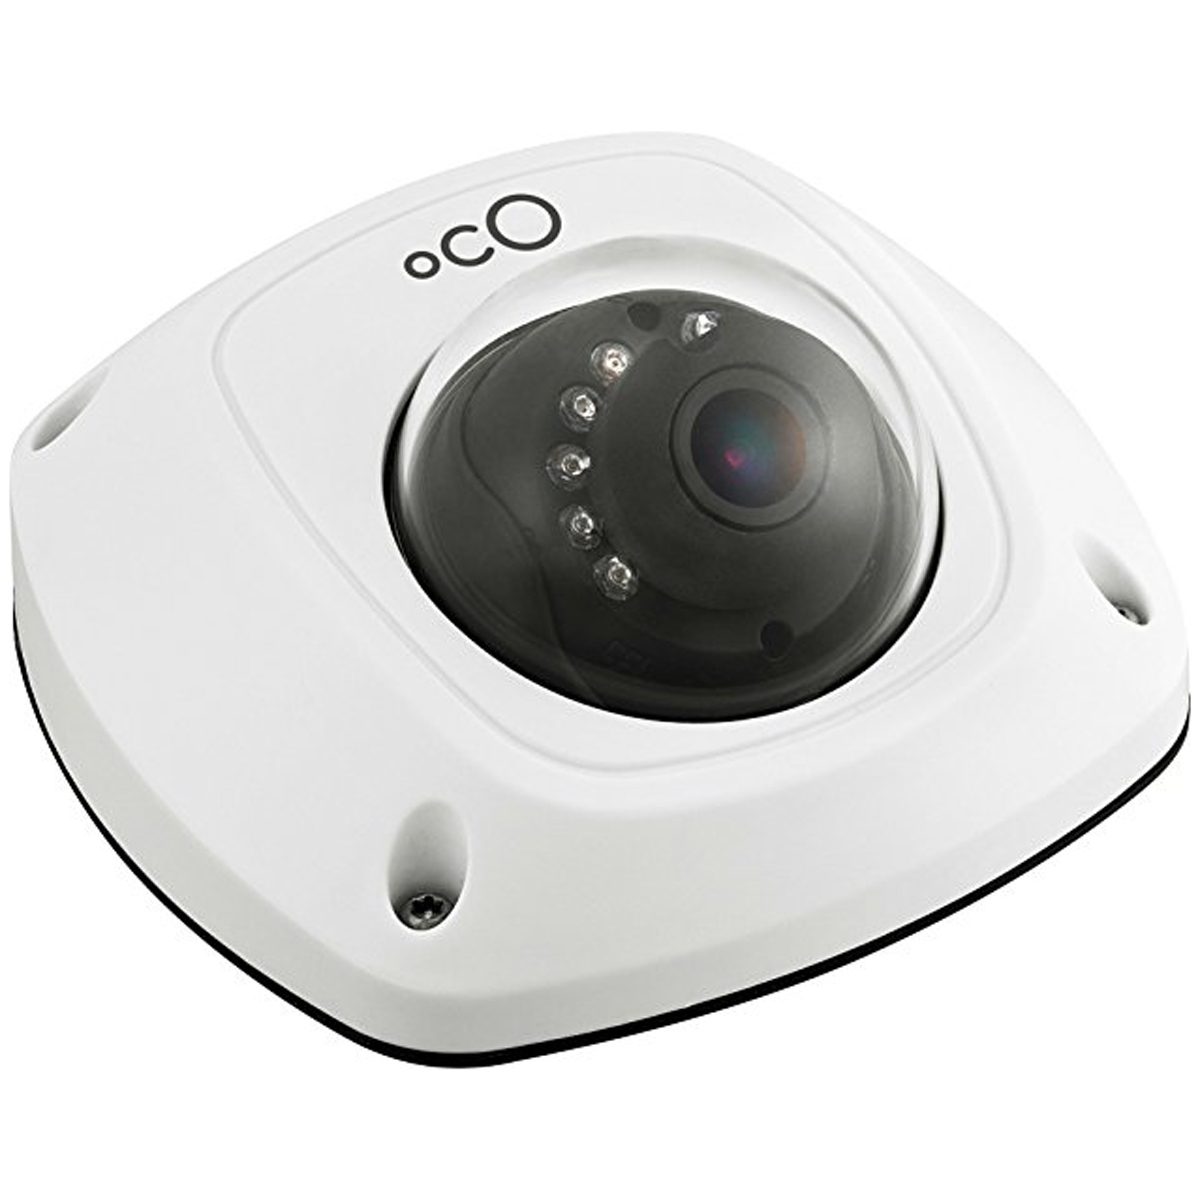 <p>If you're looking for an outdoor Wi-Fi security camera, chances are you want one that is completely cordless. Hence the desire for Wi-Fi security camera instead of wired installation. <a href="https://www.amazon.com/Video-Monitoring-Camera-Security-Storage/dp/B01M191LUW/?tag=fhm_msn-20" rel="nofollow noopener noreferrer">The Oco Pro Dome</a> has a great camera with a wide field of view and resolution both day and night. And, the Oco Pro Dome uses tamper-resistant screws and bolts to keep it safe from vandals and the housing is built to handle weather extremes from – 22° F up to 140° F. However, the Oco Pro Dome has one major drawback—it has to be mounted within 25 feet of a protected power outlet. <a href="https://www.familyhandyman.com/list/21-things-a-burglar-wont-tell-you/">Here are 21 things a burglar won't tell you.</a></p> <p>Photo: Courtesy of <a href="https://cdn.shopify.com/s/files/1/1426/2472/products/oco-pro-dome-hero_345x.png?v=1485392350" rel="nofollow noopener noreferrer">getoco.com</a></p>